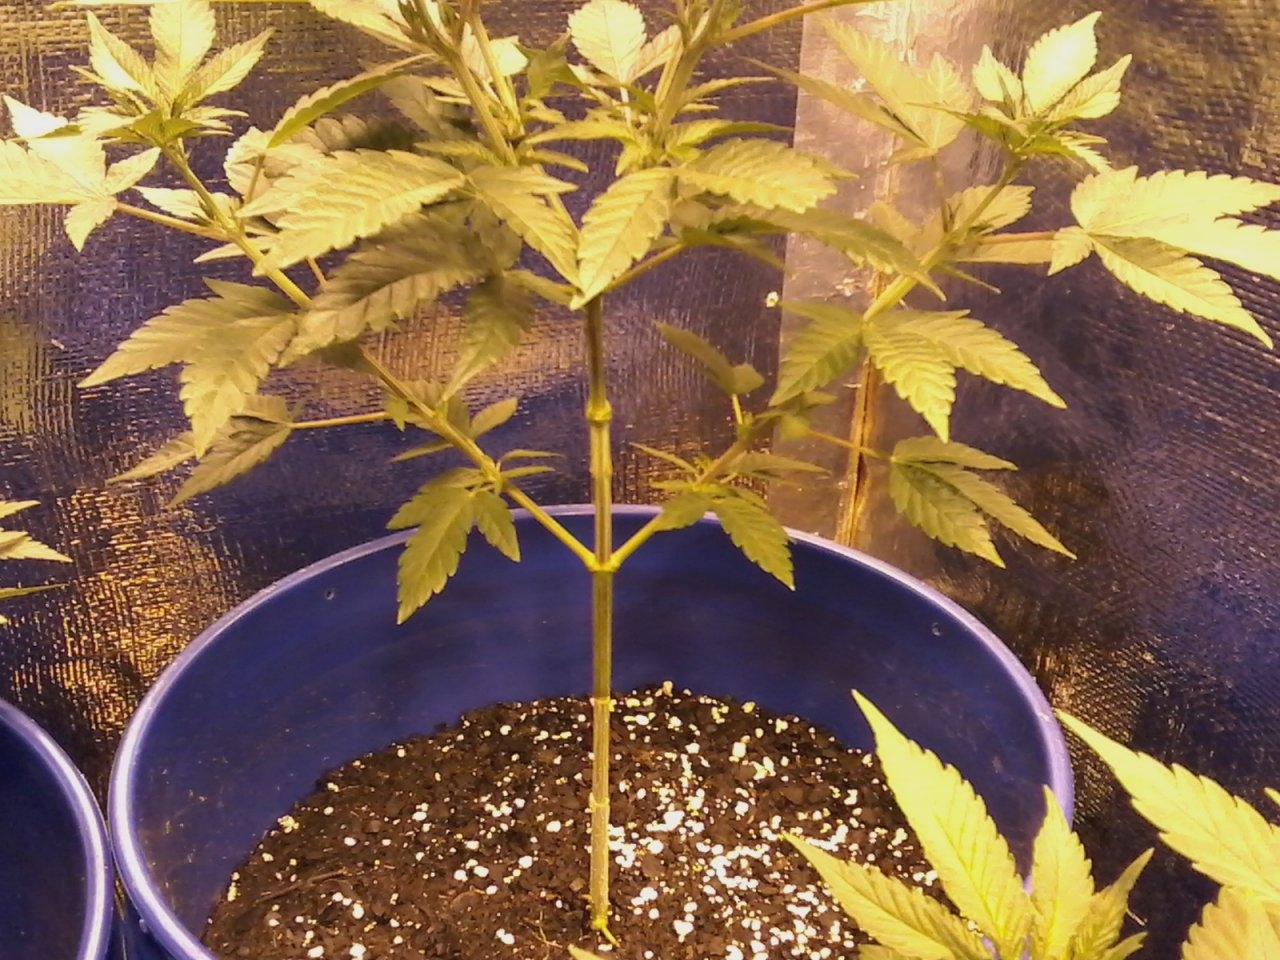 Bonsai cannabis from seed to flower.